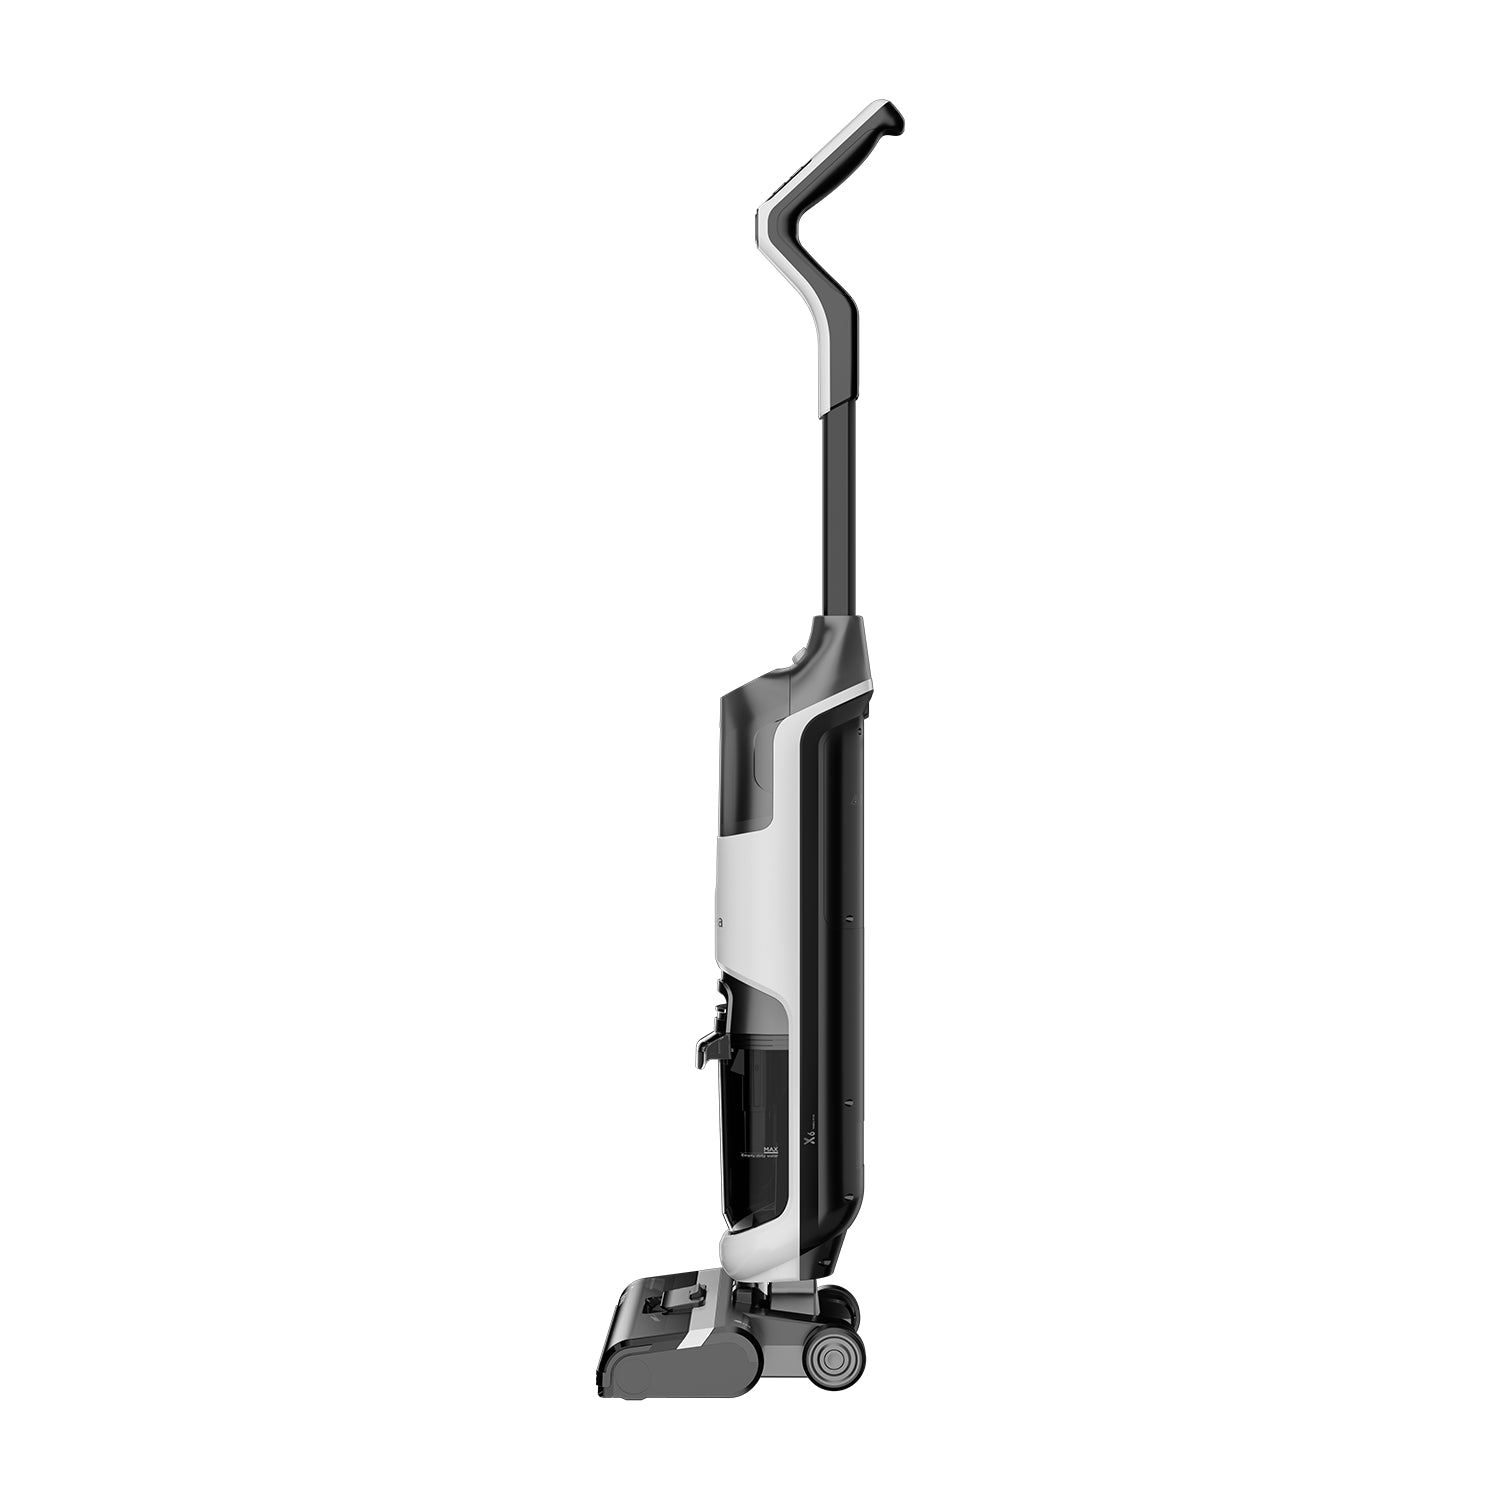 Midea 3 In 1 function for Vacuum Mop & Wash,190W Deep Floor Washer MWD-20P